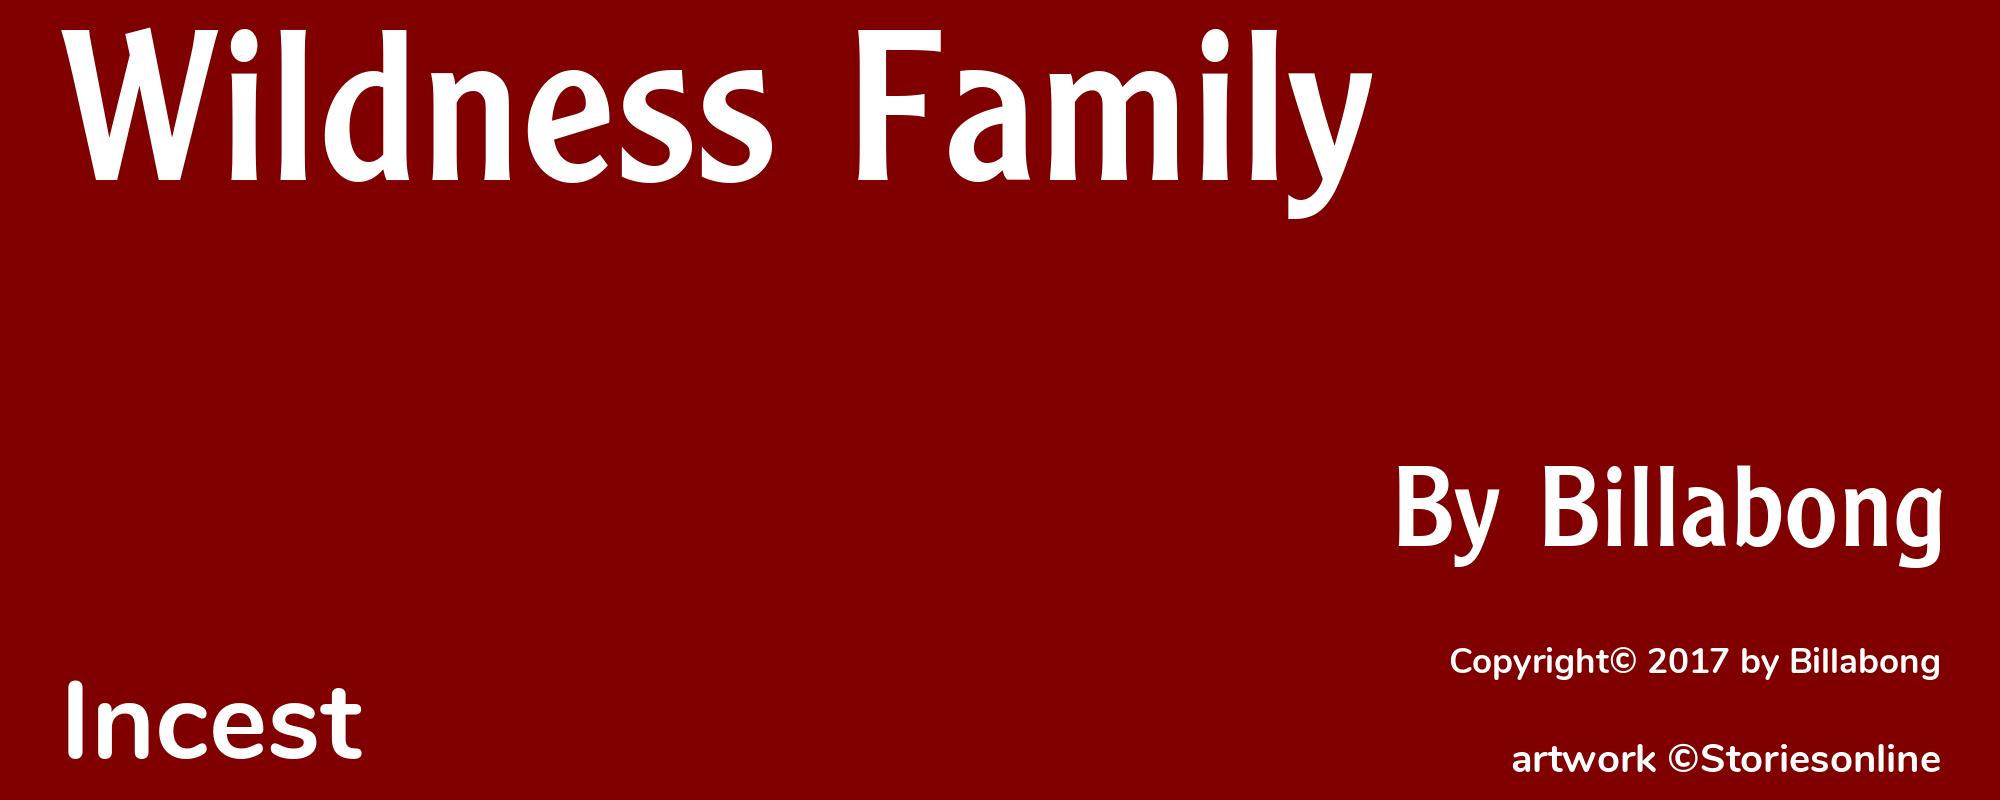 Wildness Family - Cover